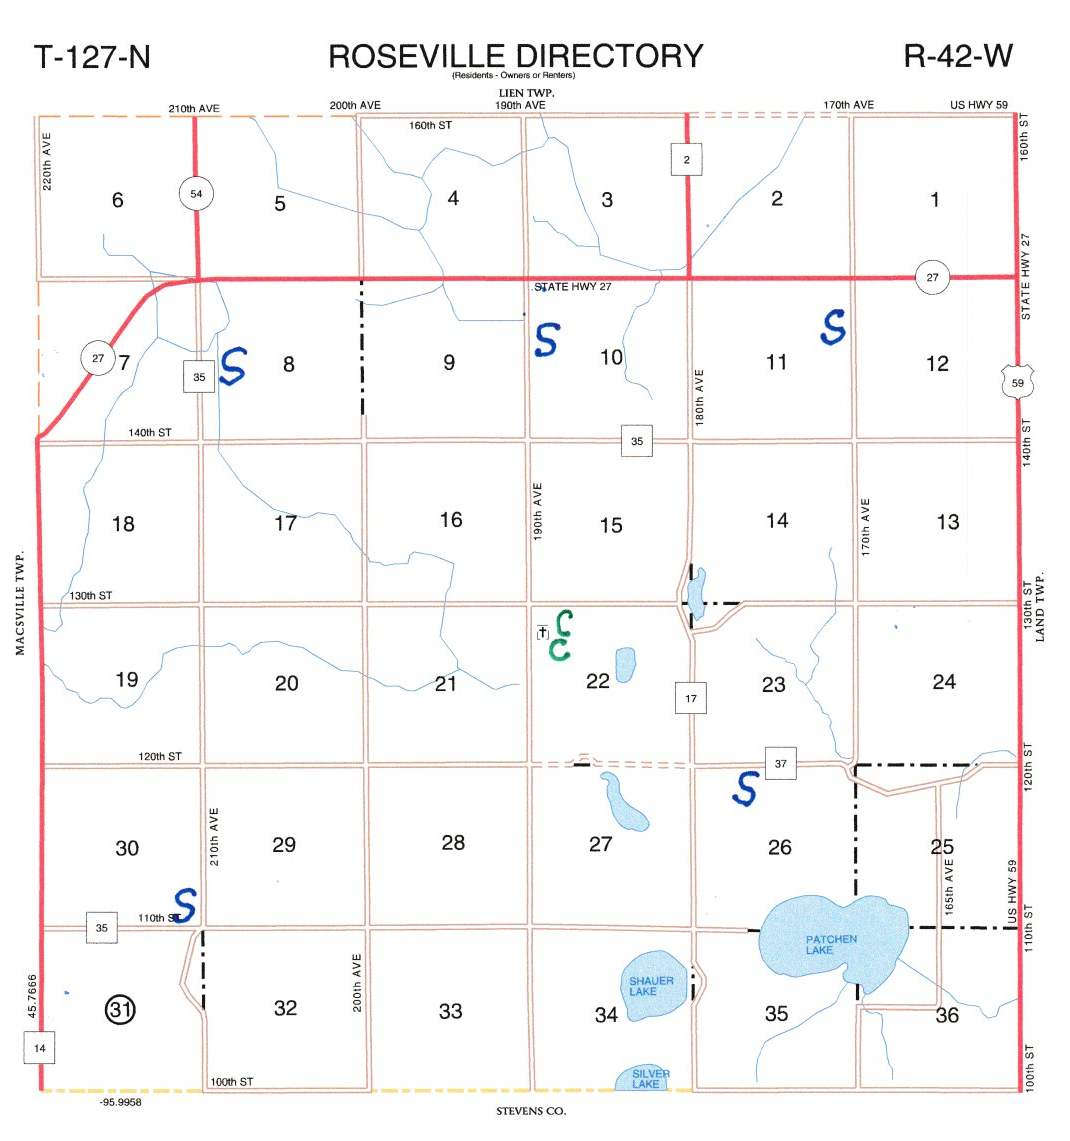 Roseville Township Schools and Cemeteries